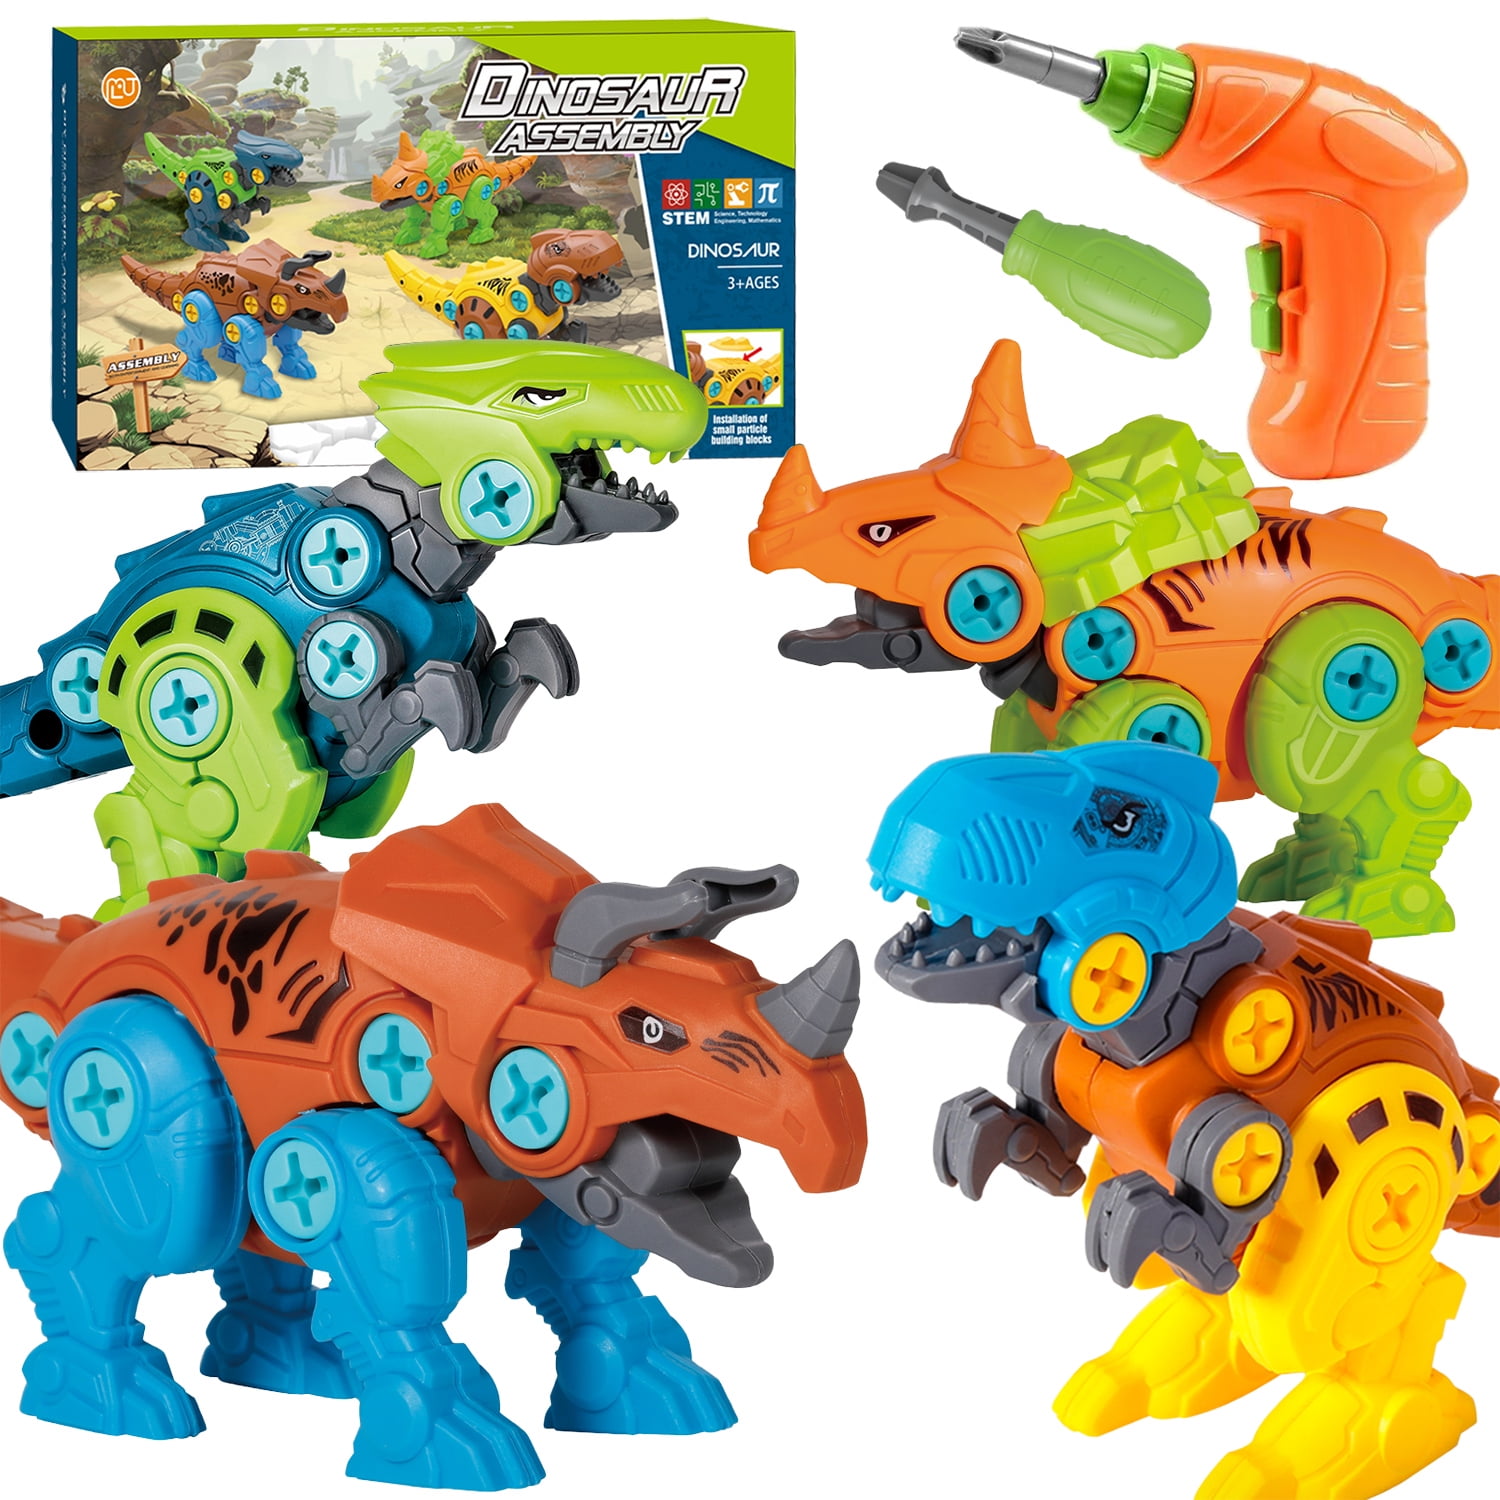 Kids Dinosaur Toys Building Toy Set with Electric Drill,Kids Building Dino Play Kit Construction Engineering Play Kit RS009-1 Brown TOPCHANCES Take Apart Dinosaur Toys for Boys 